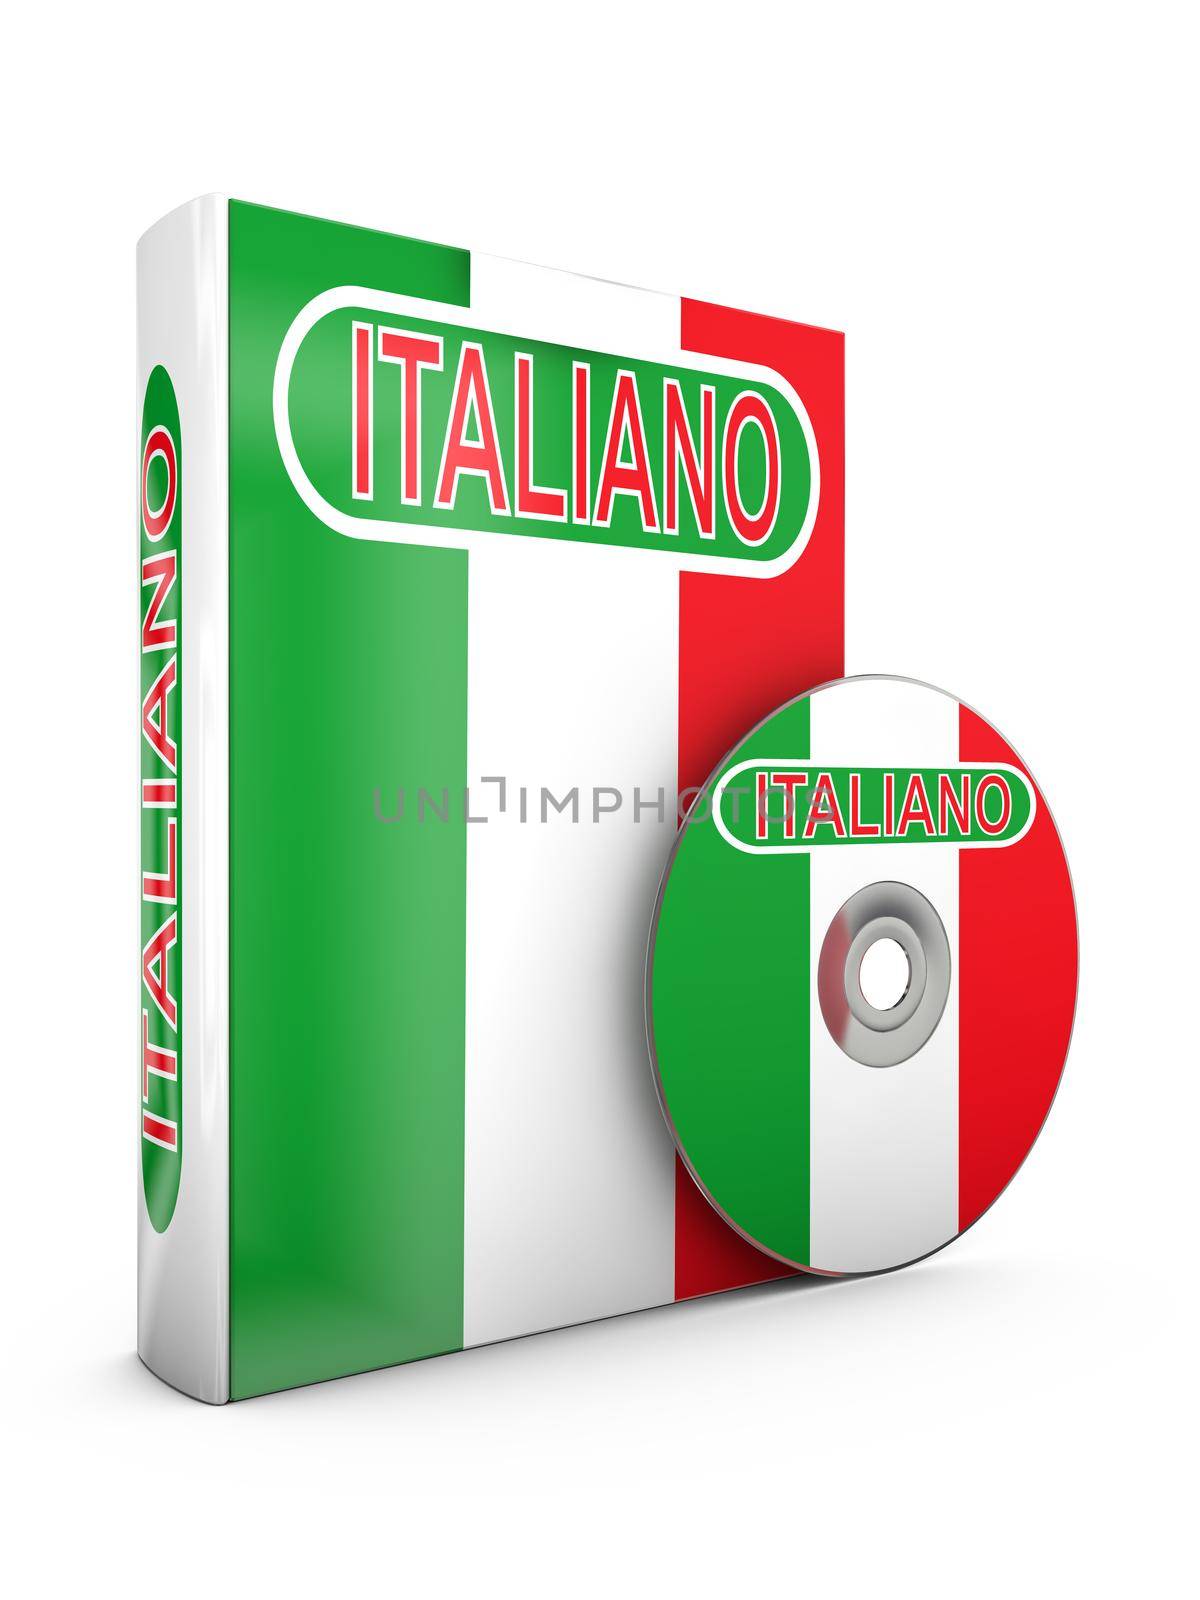 book and a CD with the image of the flag of Italy and the inscription - Italian